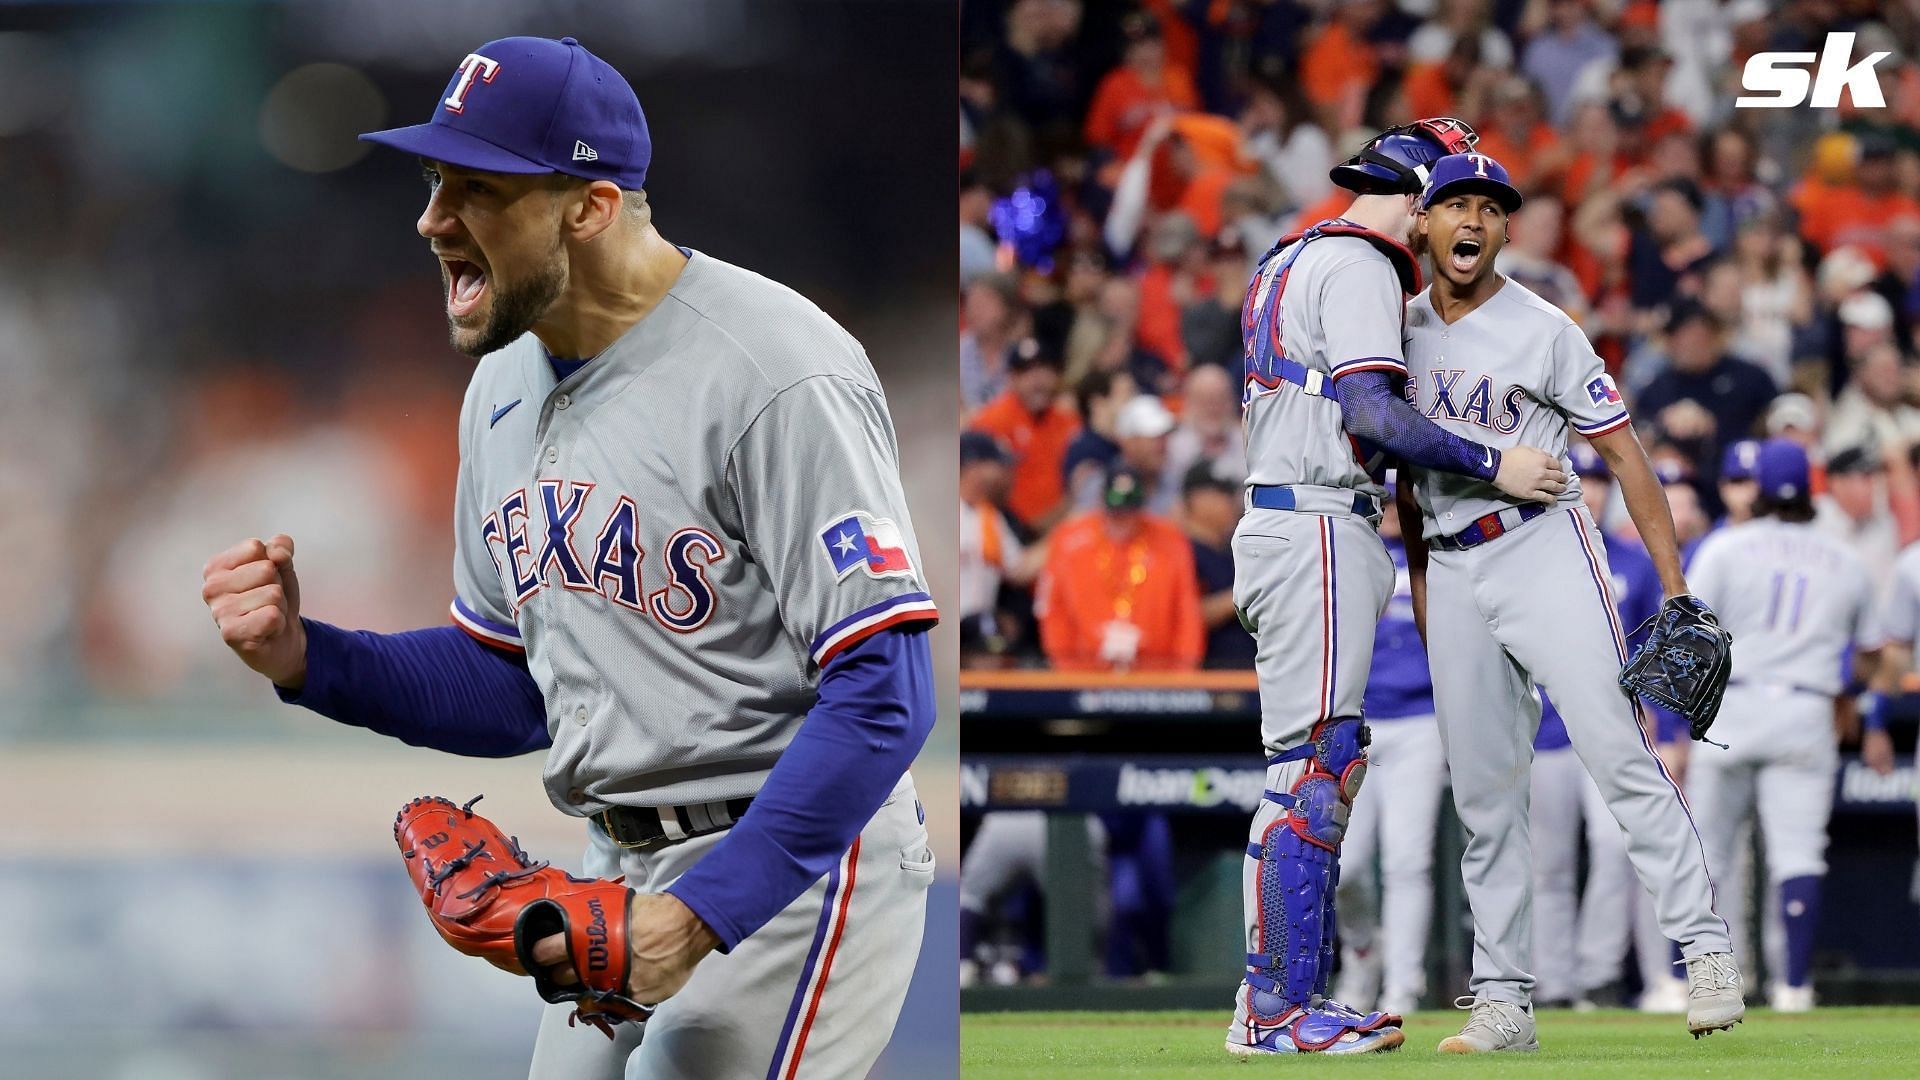 The Texas Rangers now have a 2-0 lead in the ALCS over the Astros